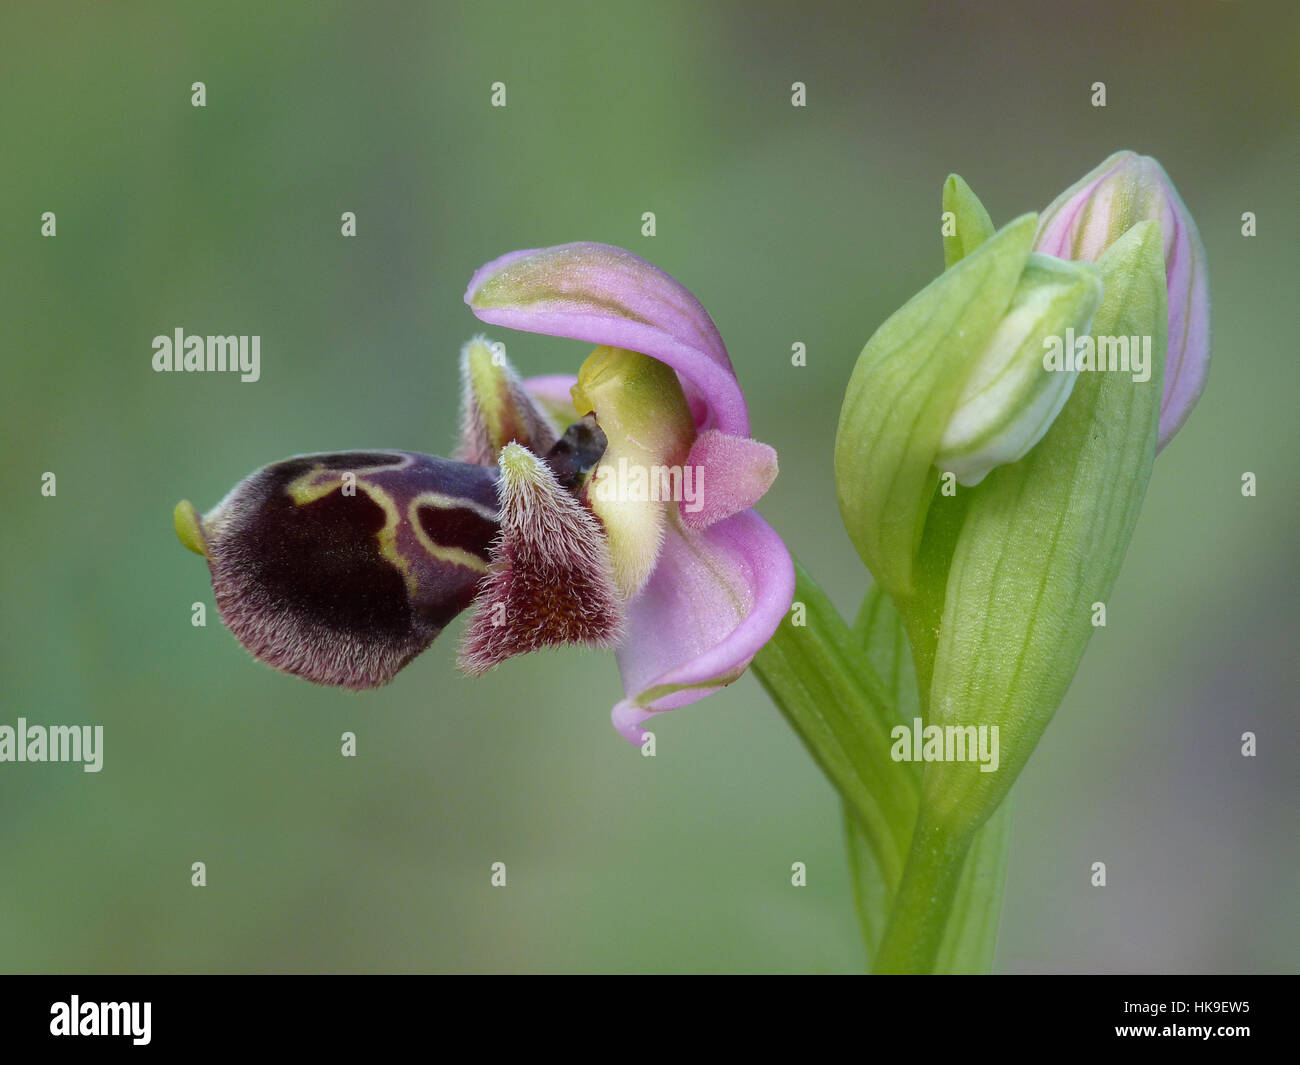 Ophrys Umbilicata Close up of flower, Cyprus, March 2015 Stock Photo